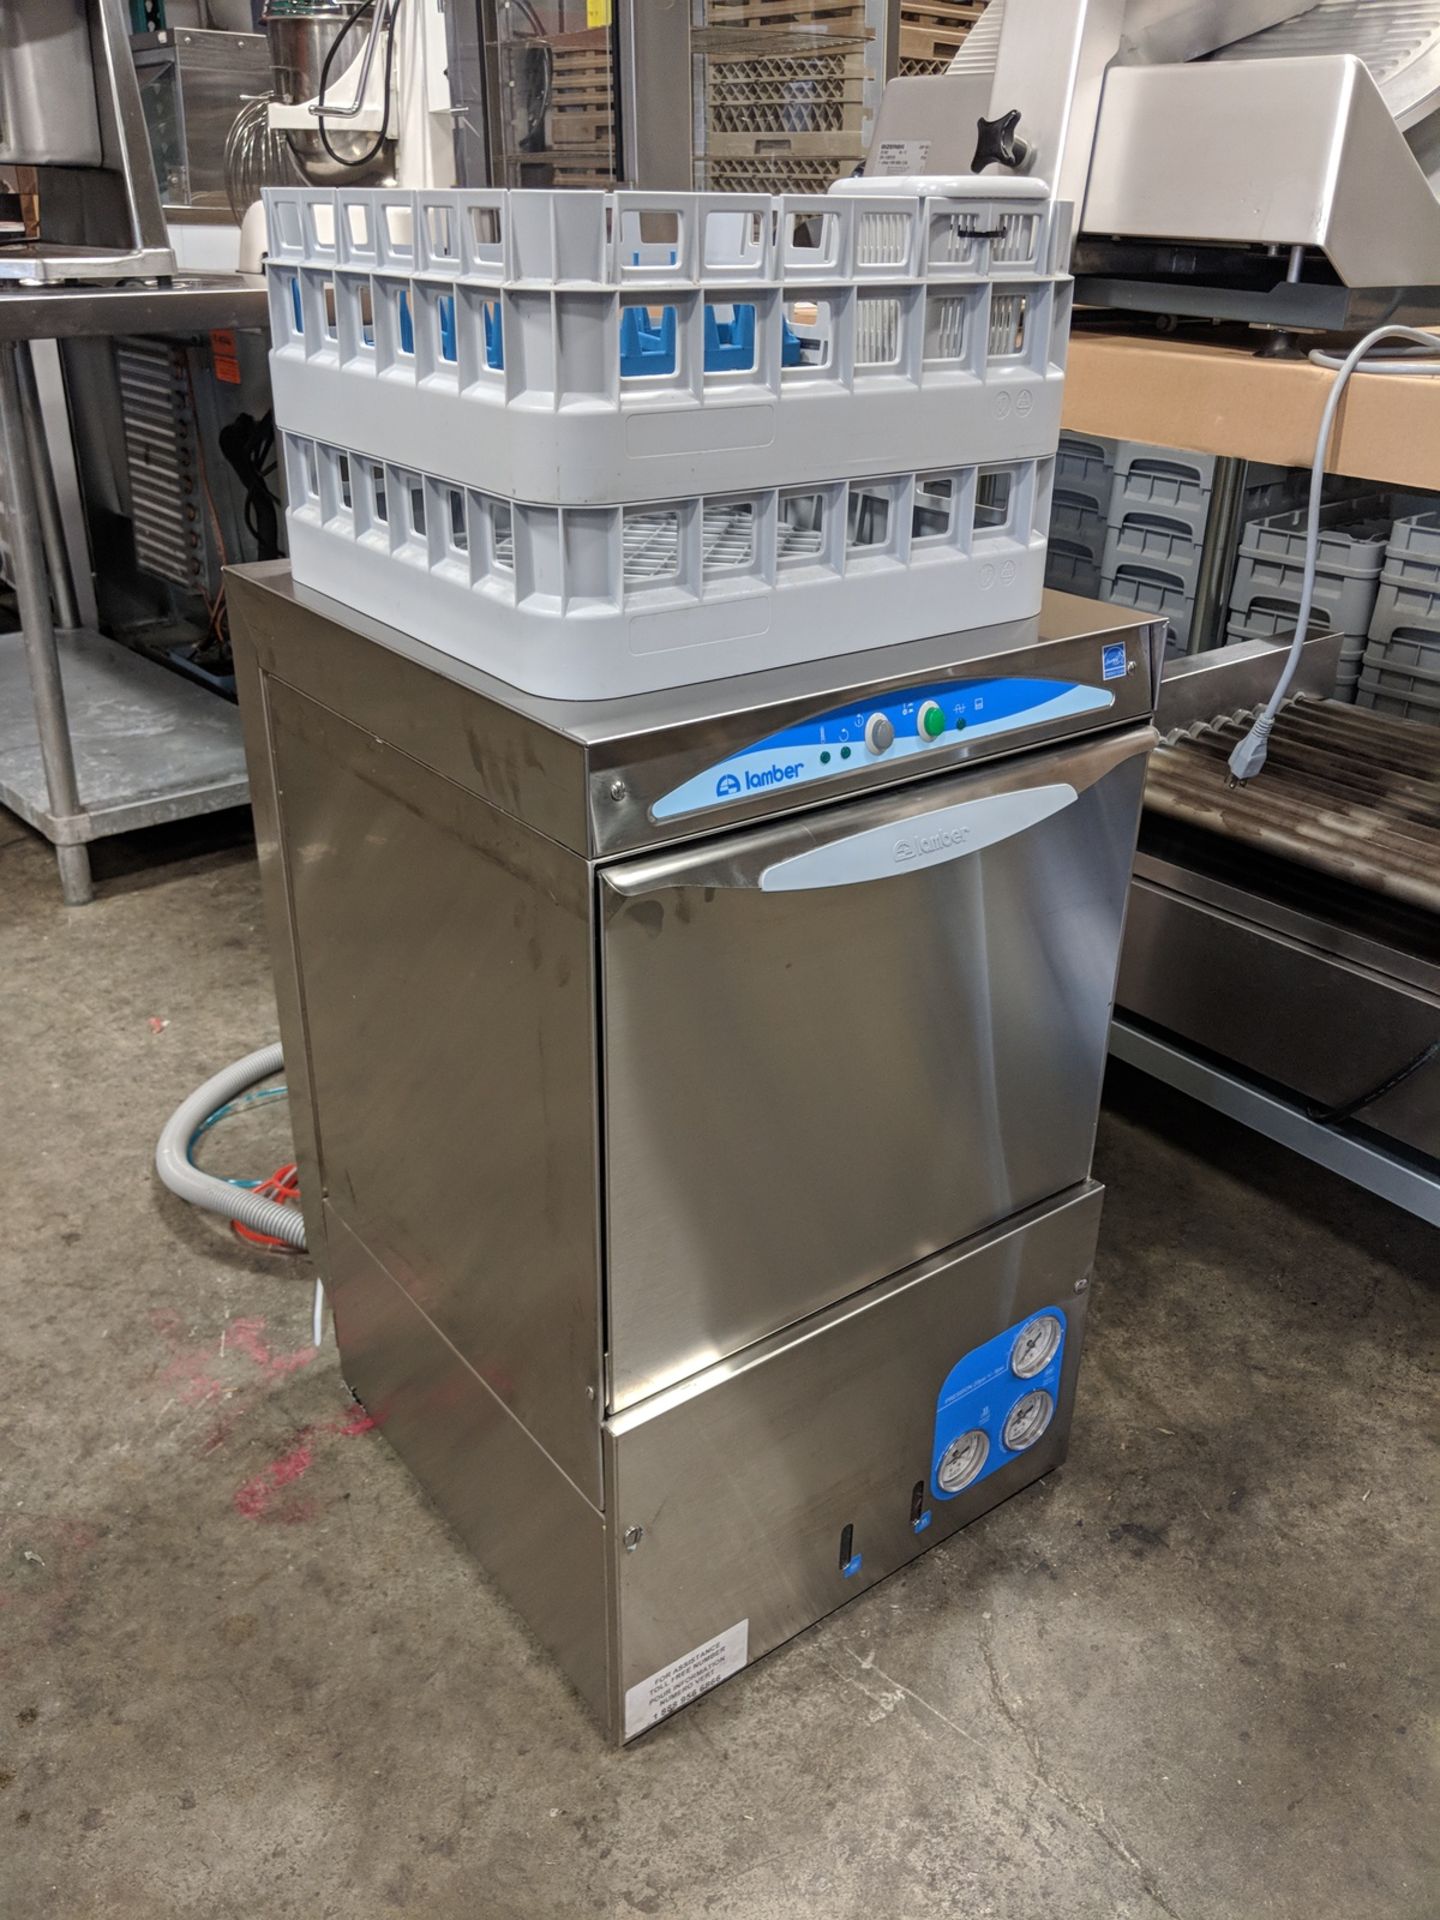 Lamber Undercounter Glass Washer, model DSP3-UL - Image 4 of 8